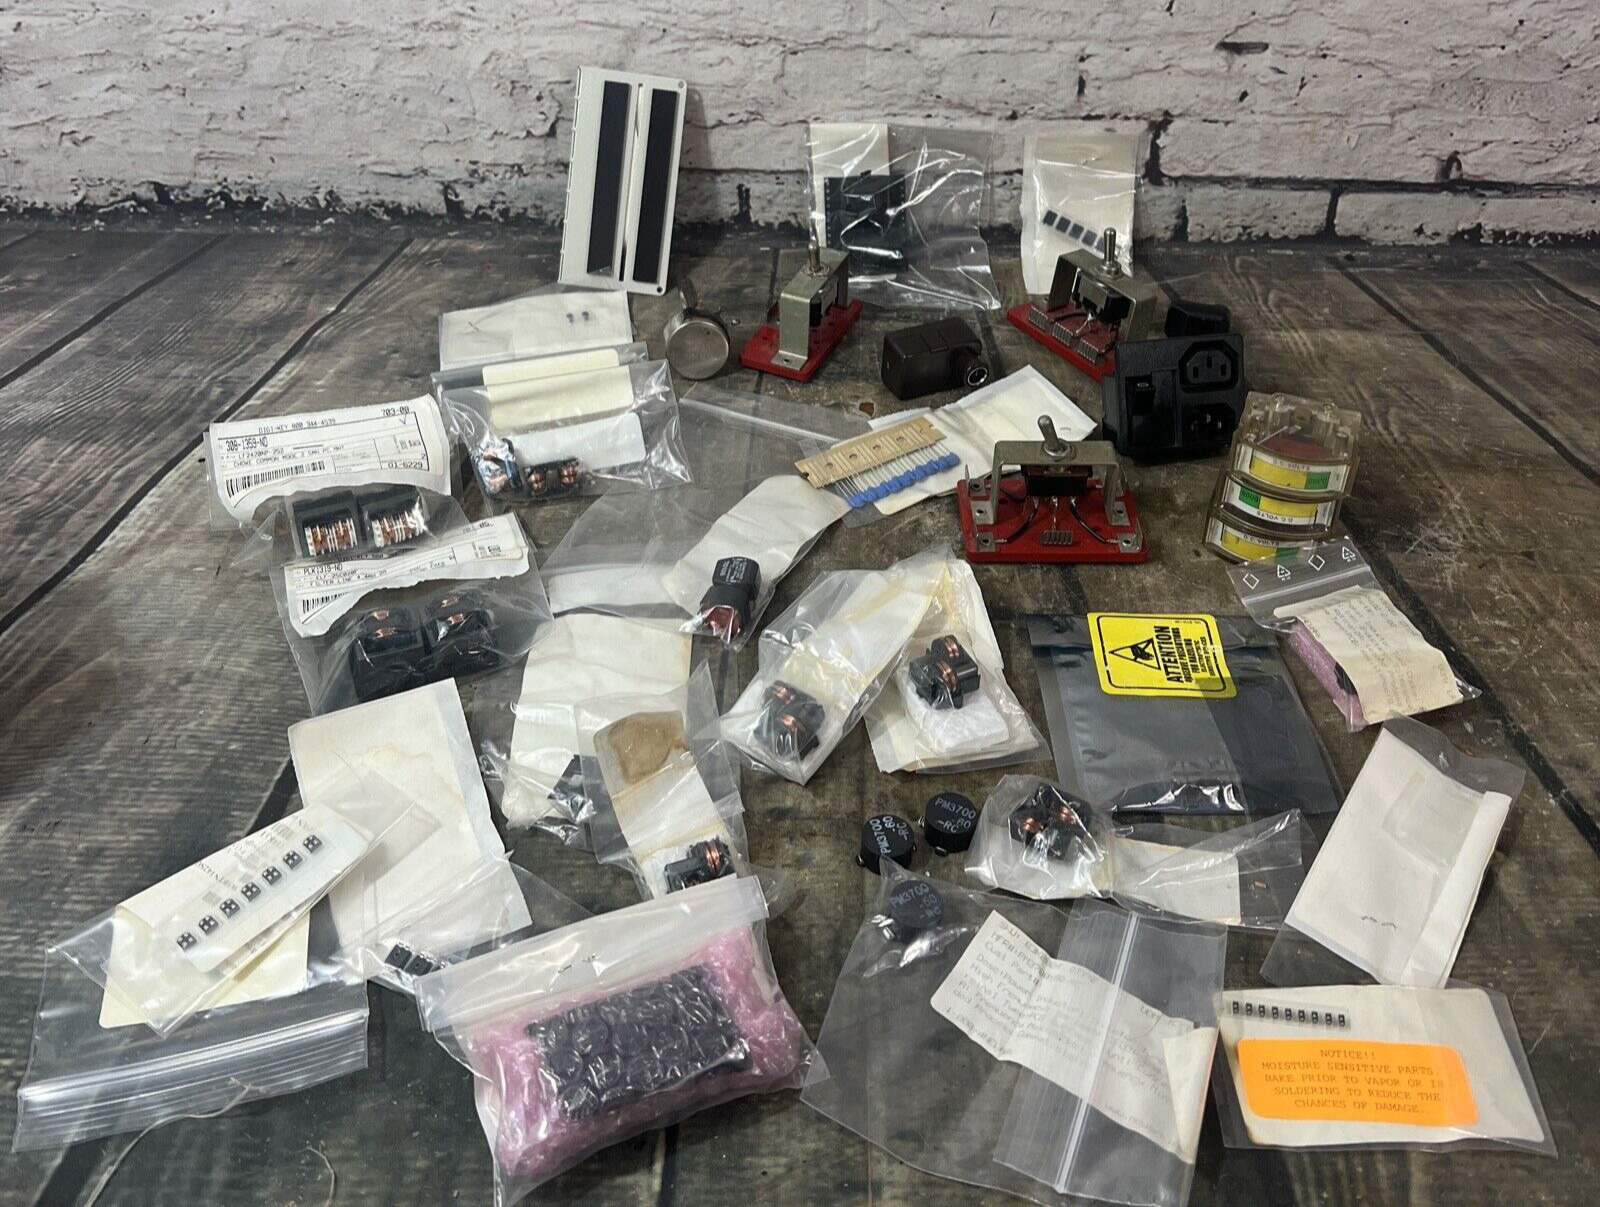 Nice Lot Of Old Stock Components and Electrical Pieces For Circuit Boards & More